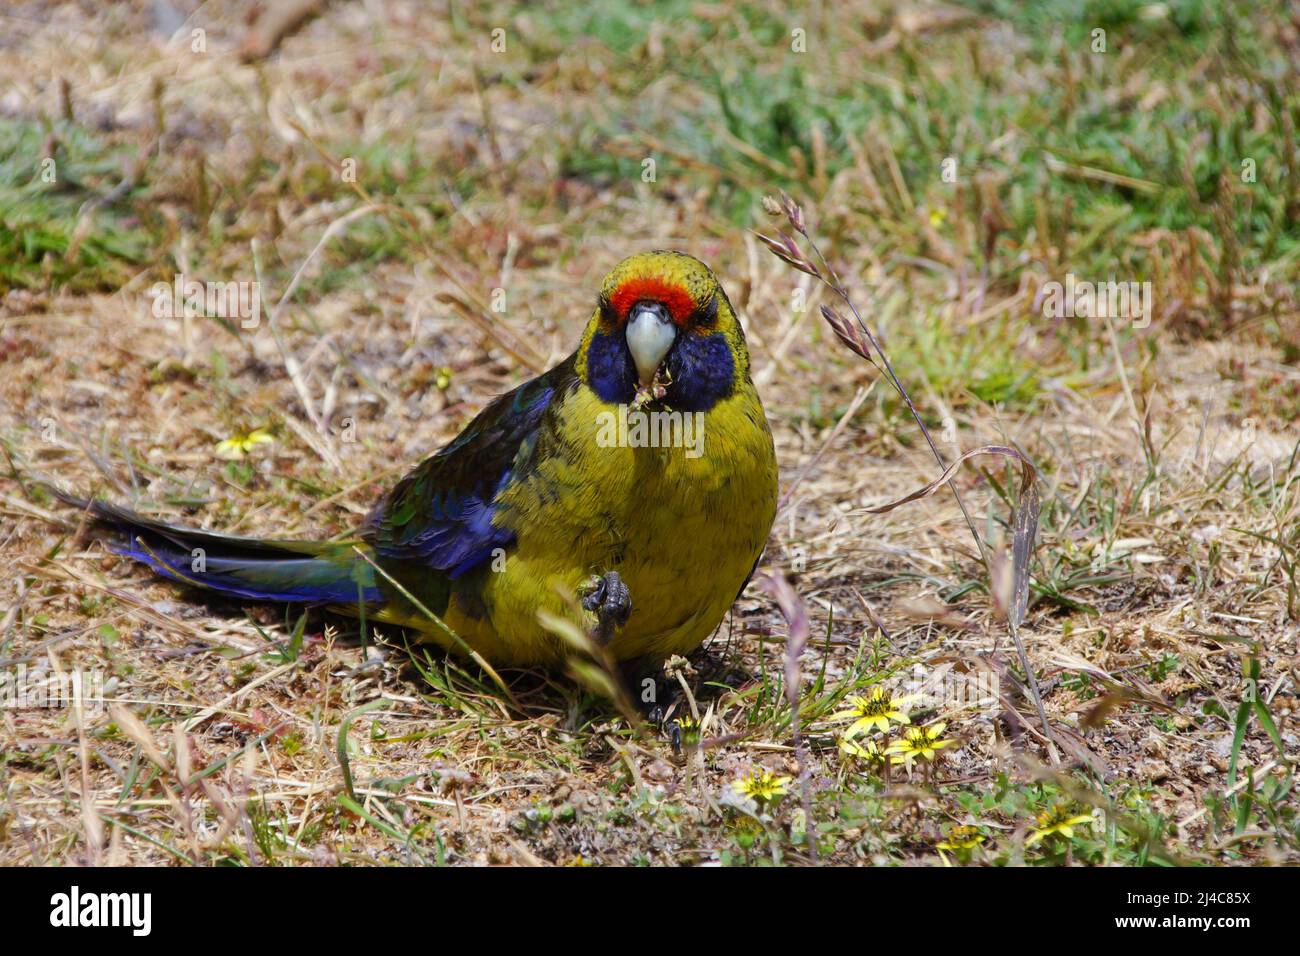 Green Rosella (Platycercus caledonicus), broad-tailed parrot from Tasmania Stock Photo